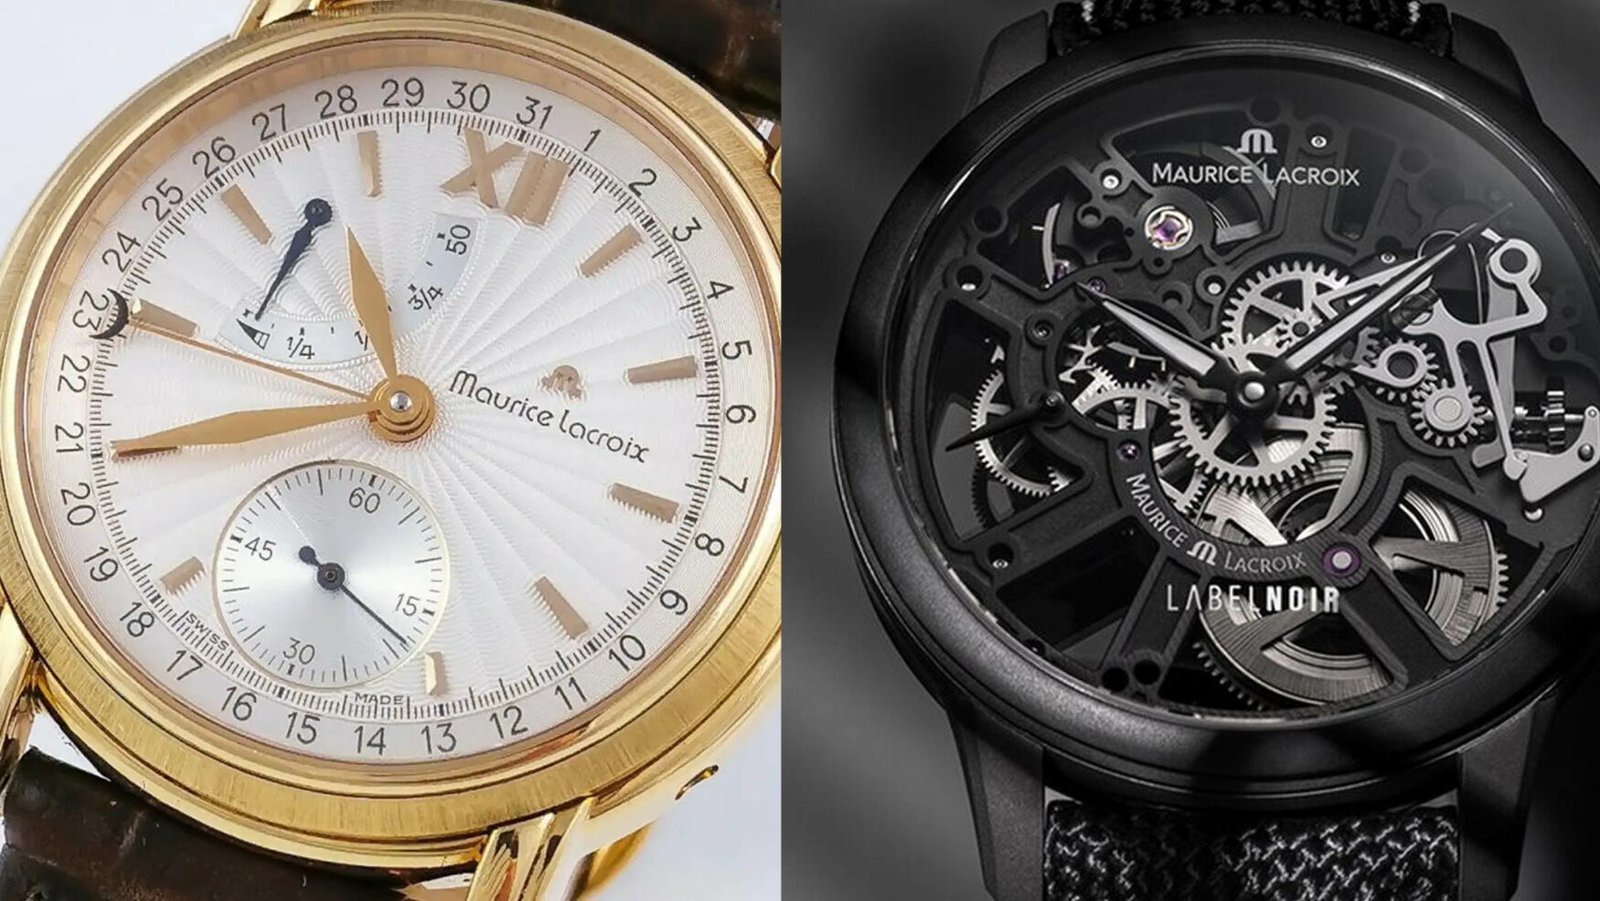 The evolution of the Maurice Lacroix Masterpiece collection